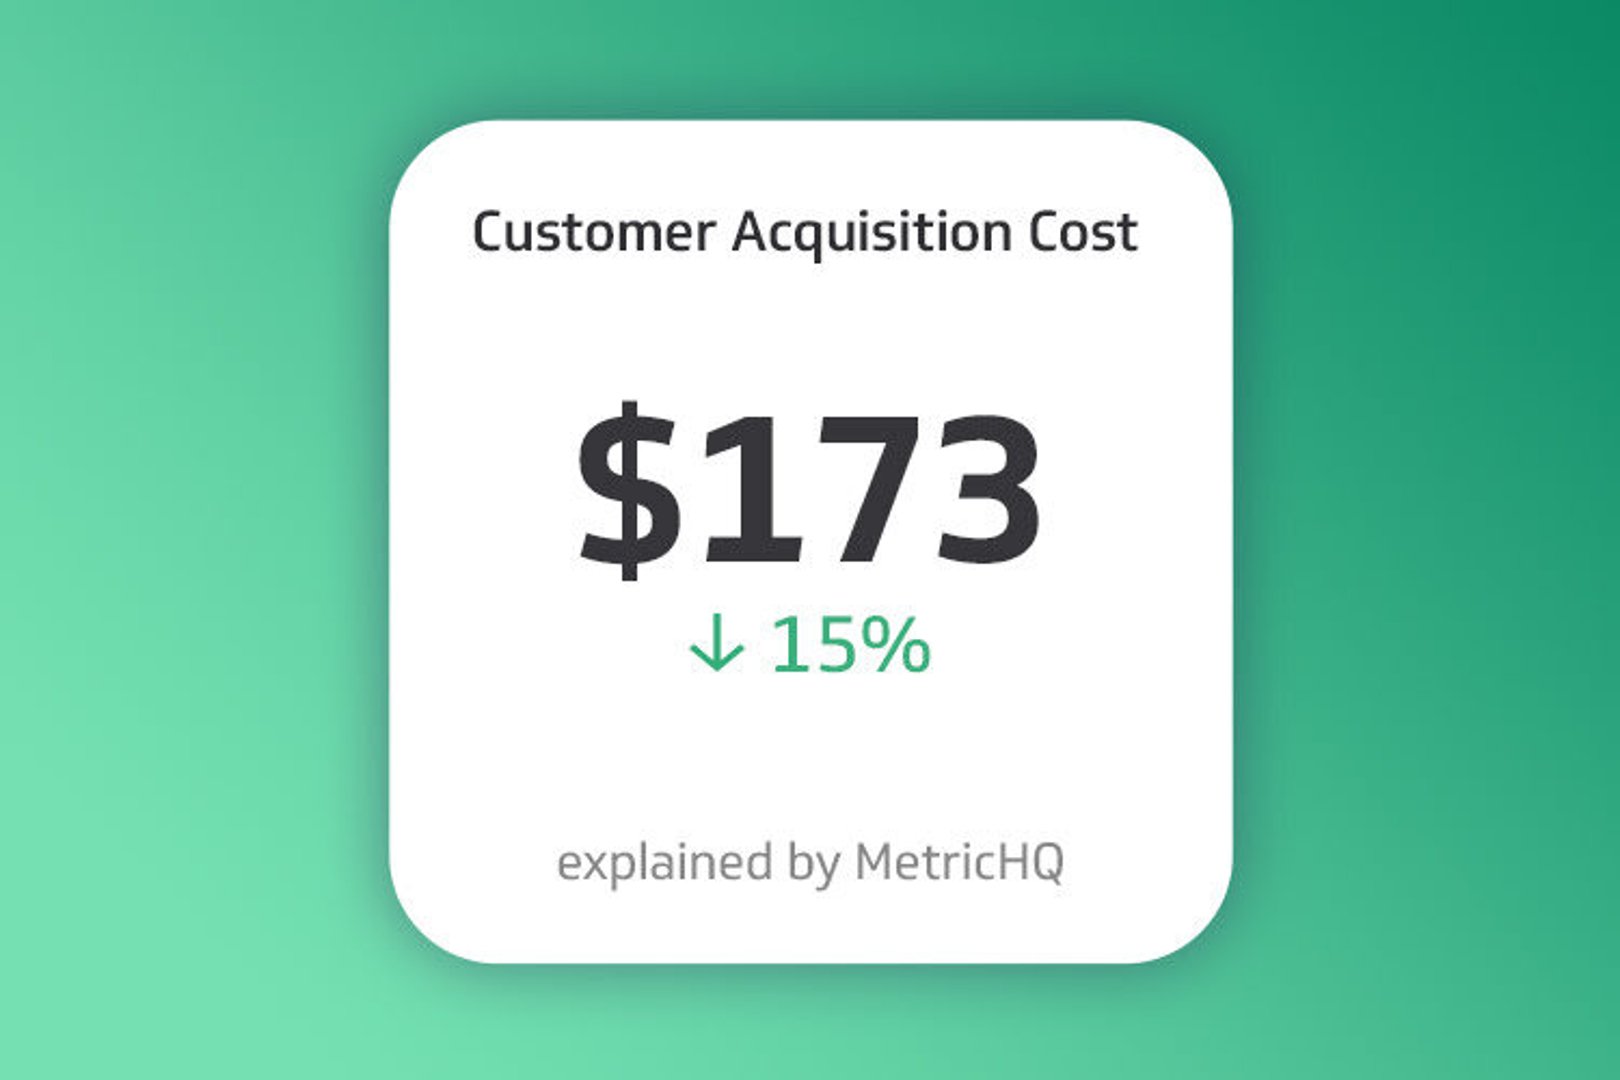 Top Sales Kp Is   Customer Acquisition Cost on Metric Hq